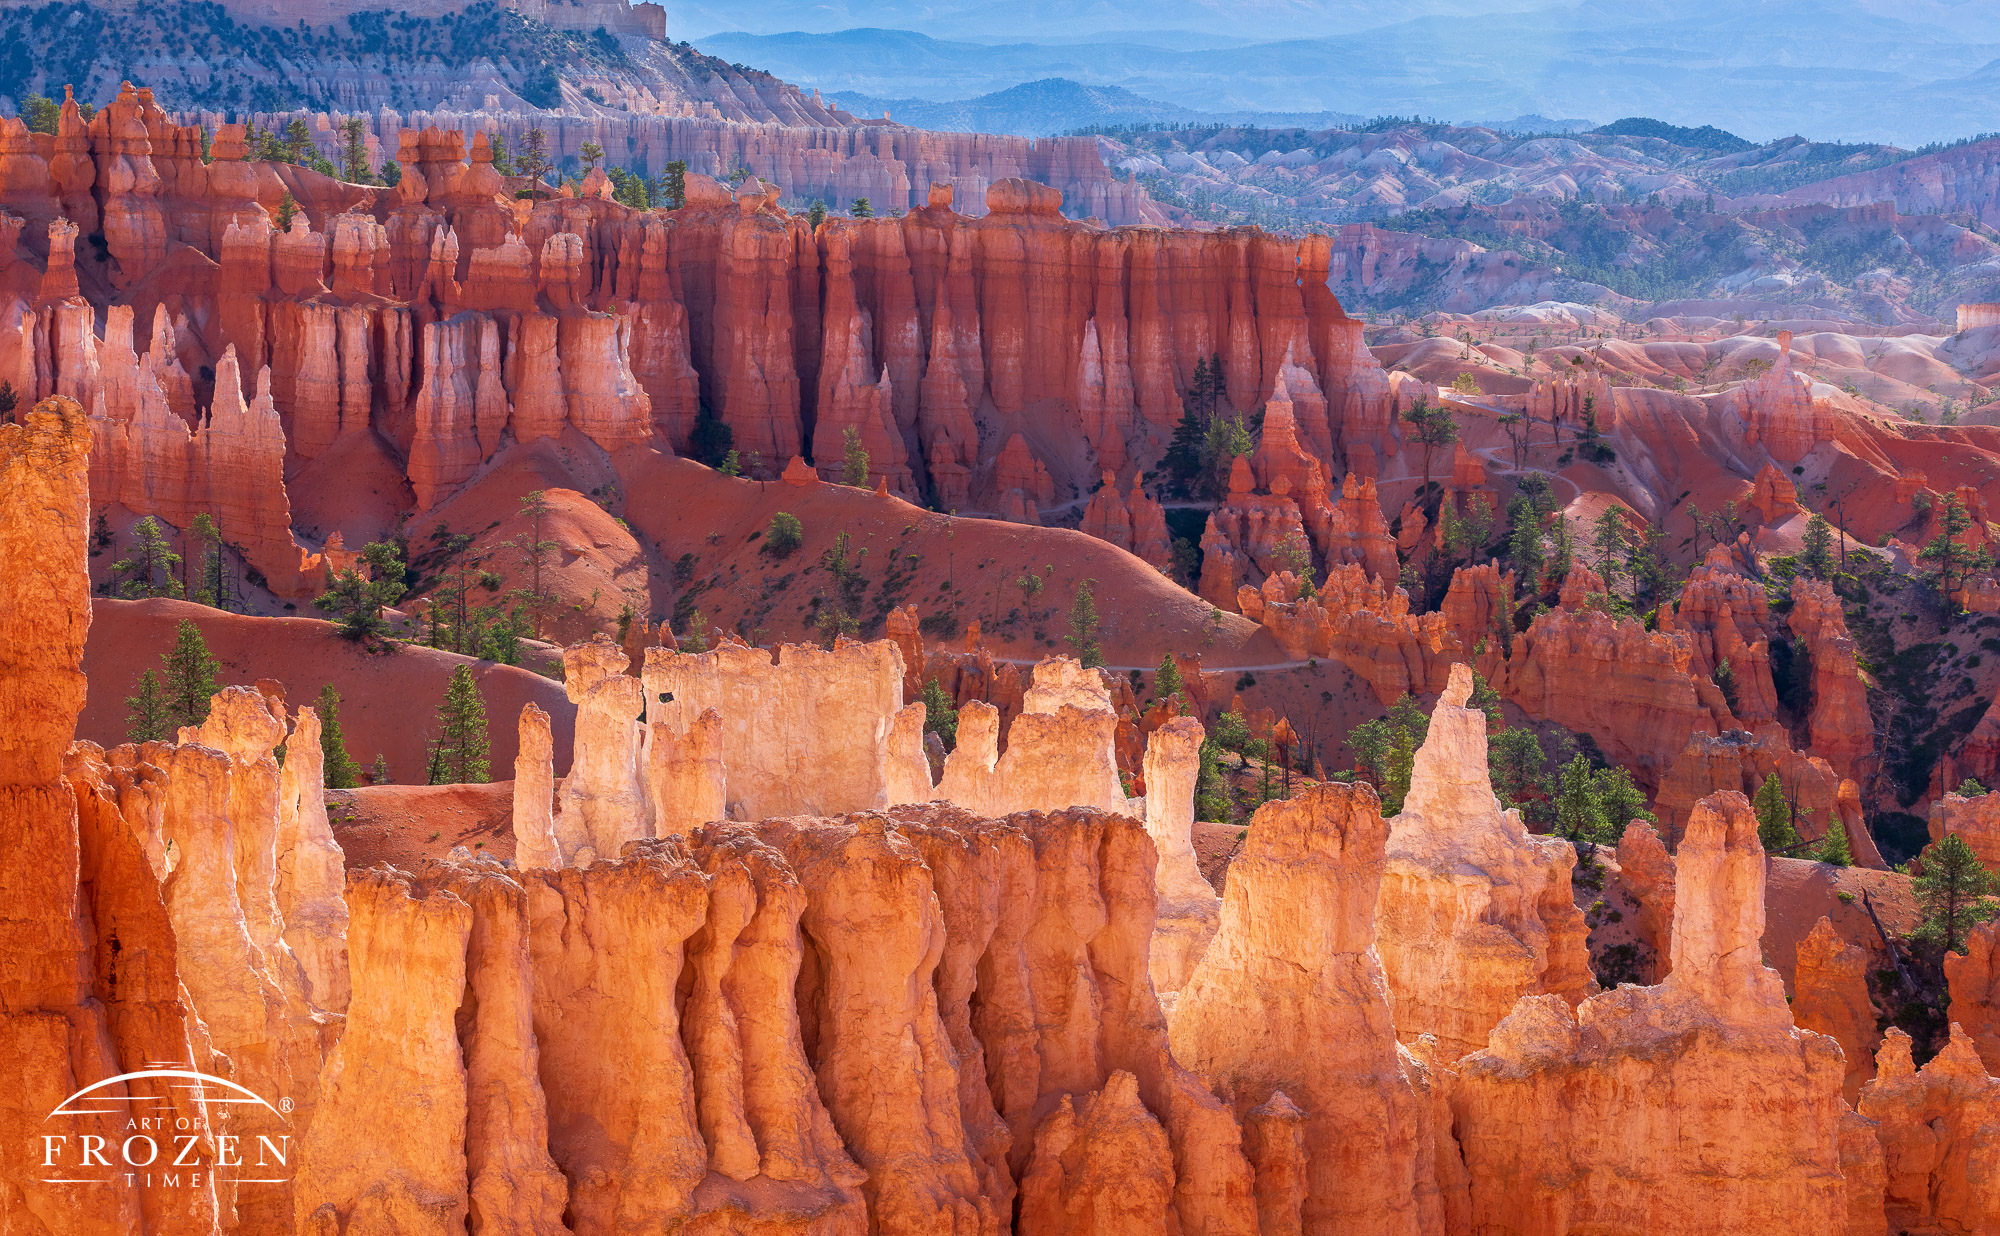 A telephoto view of Bryce Canyon hoodoos illuminated as the rising sun rakes light across their red and white sandstone layers.